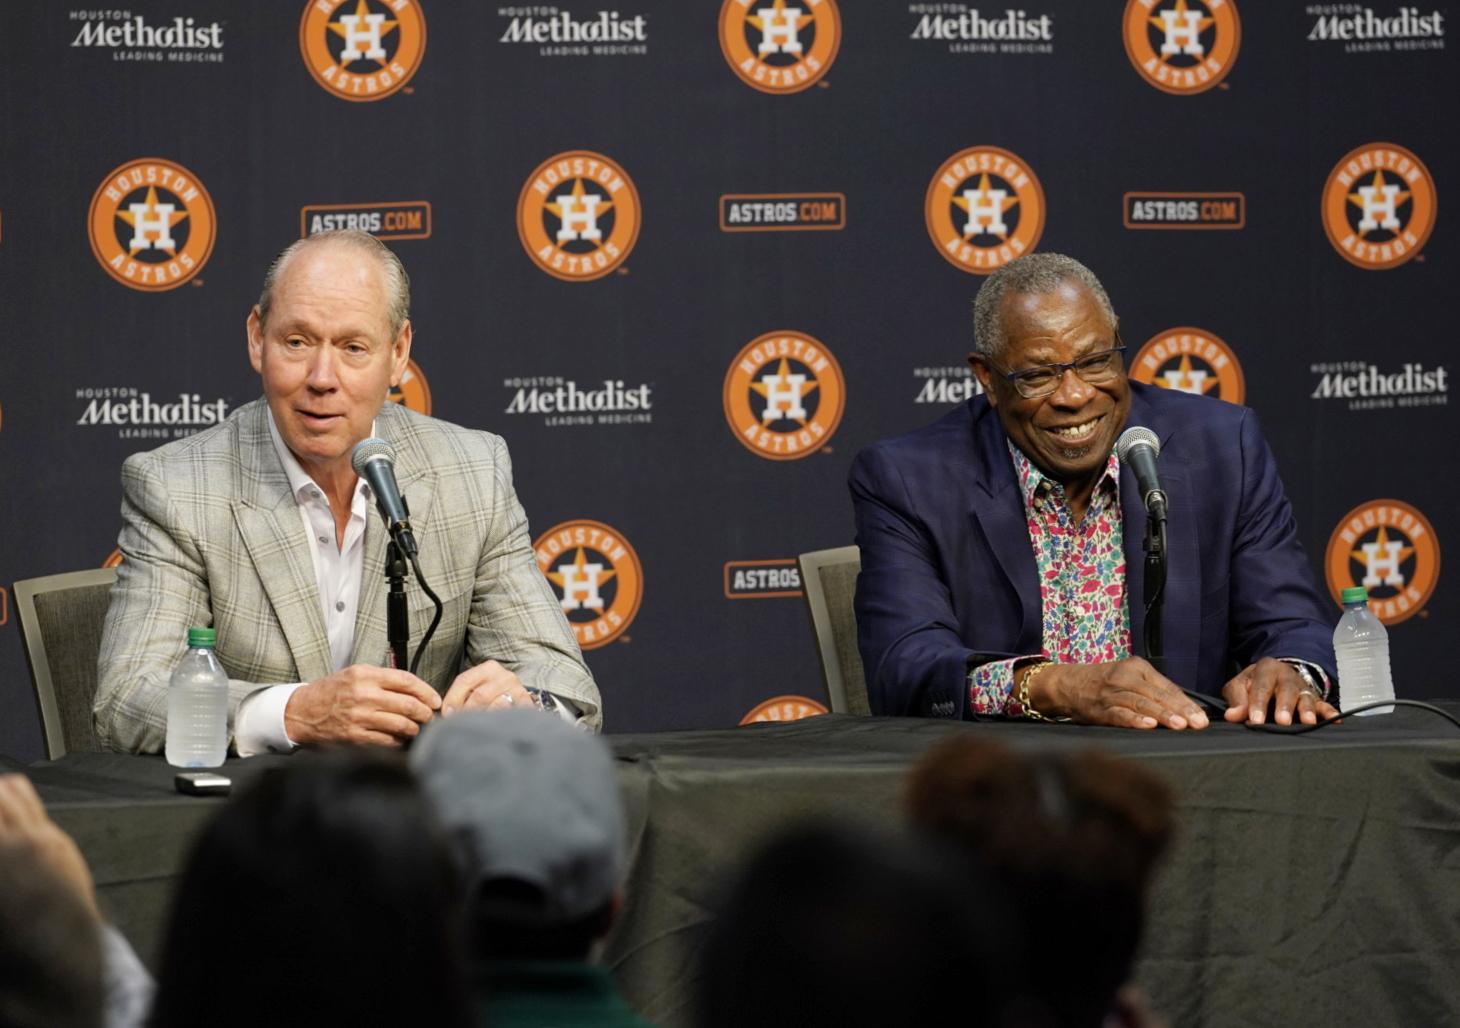 Astros' offseason involves Baker contract, free agents